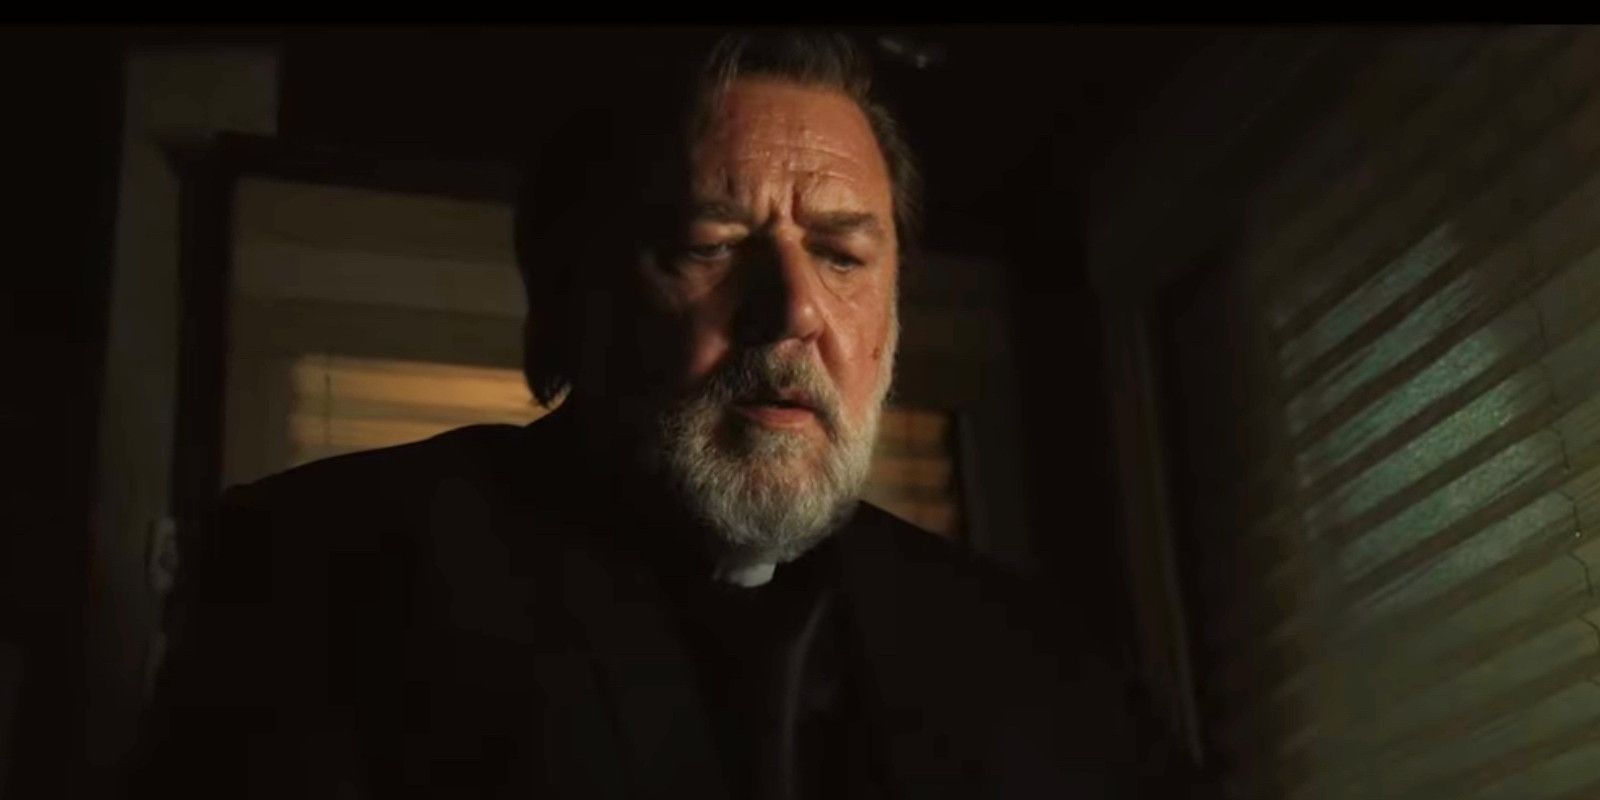 The Exorcism Russell Crowe looking concerned in a dark room 